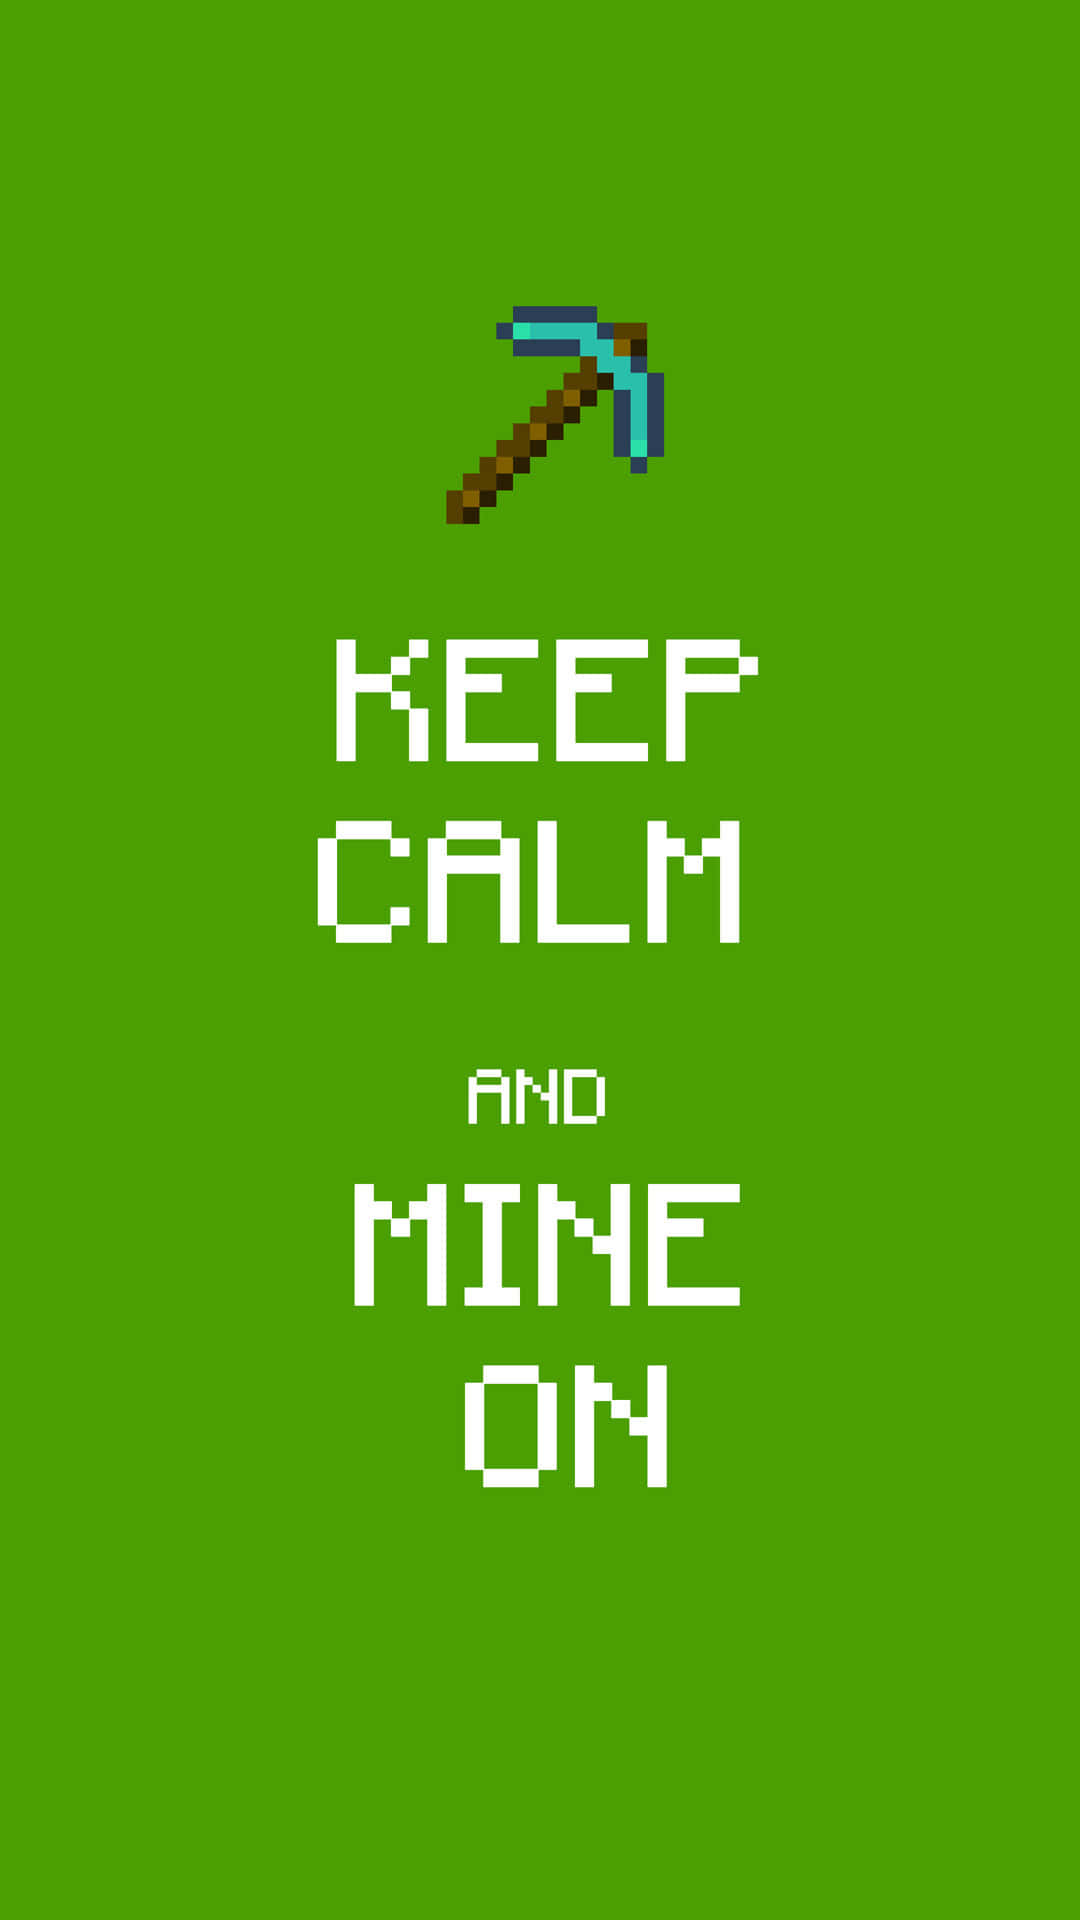 Keep Calm And Mine On Pixel 3 Minecraft Background